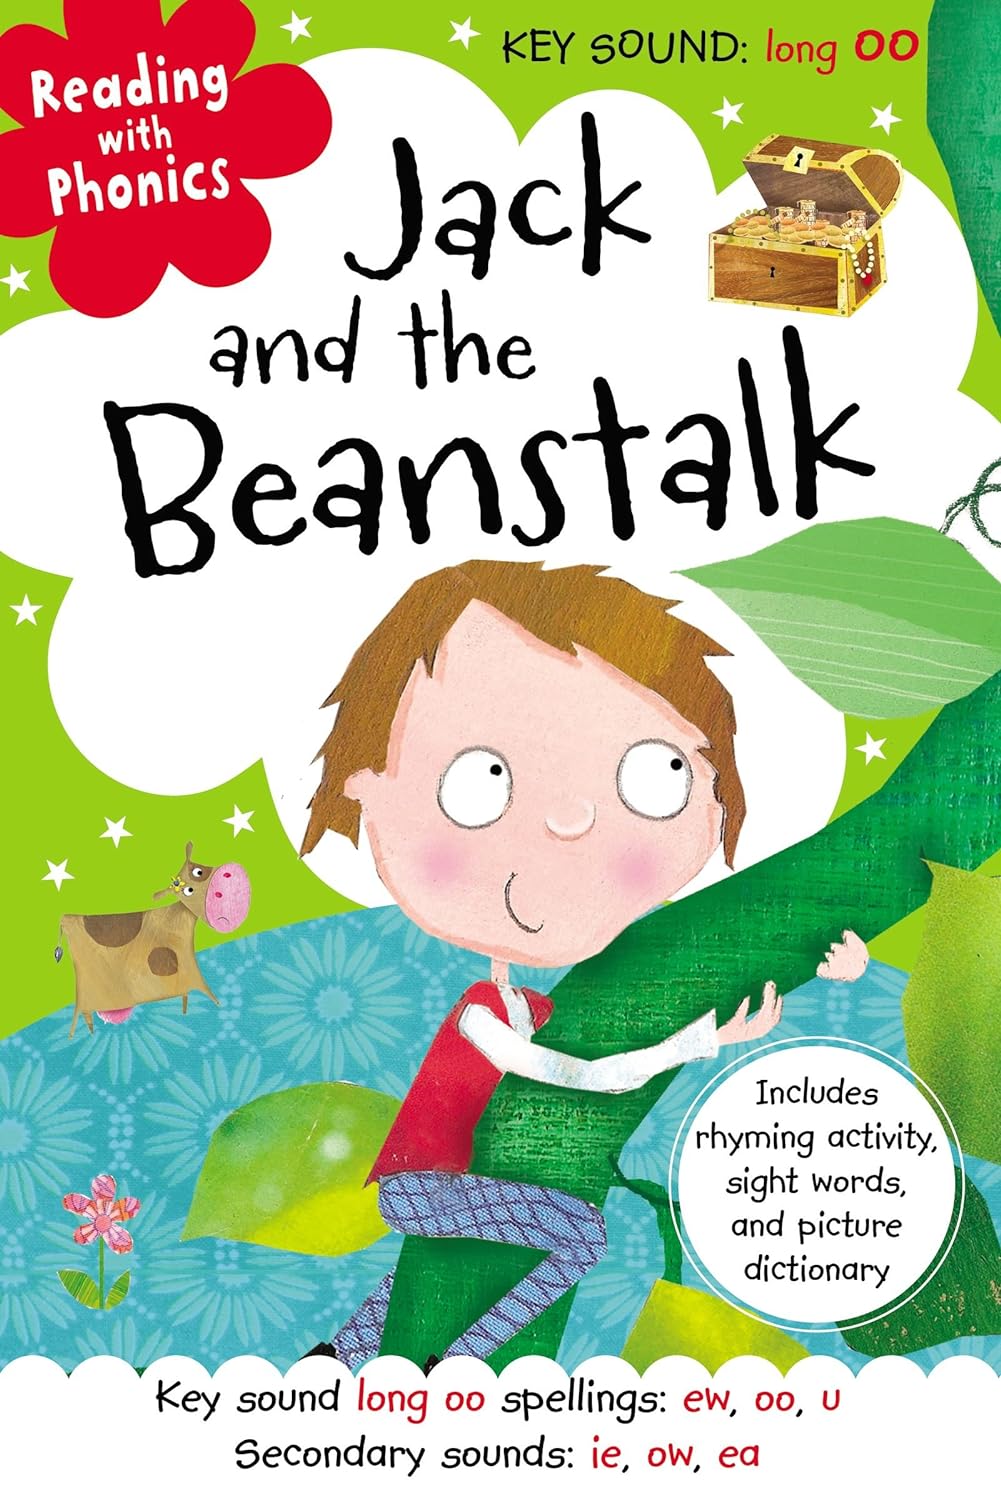 Reading with Phonics: Jack And The Beanstalk